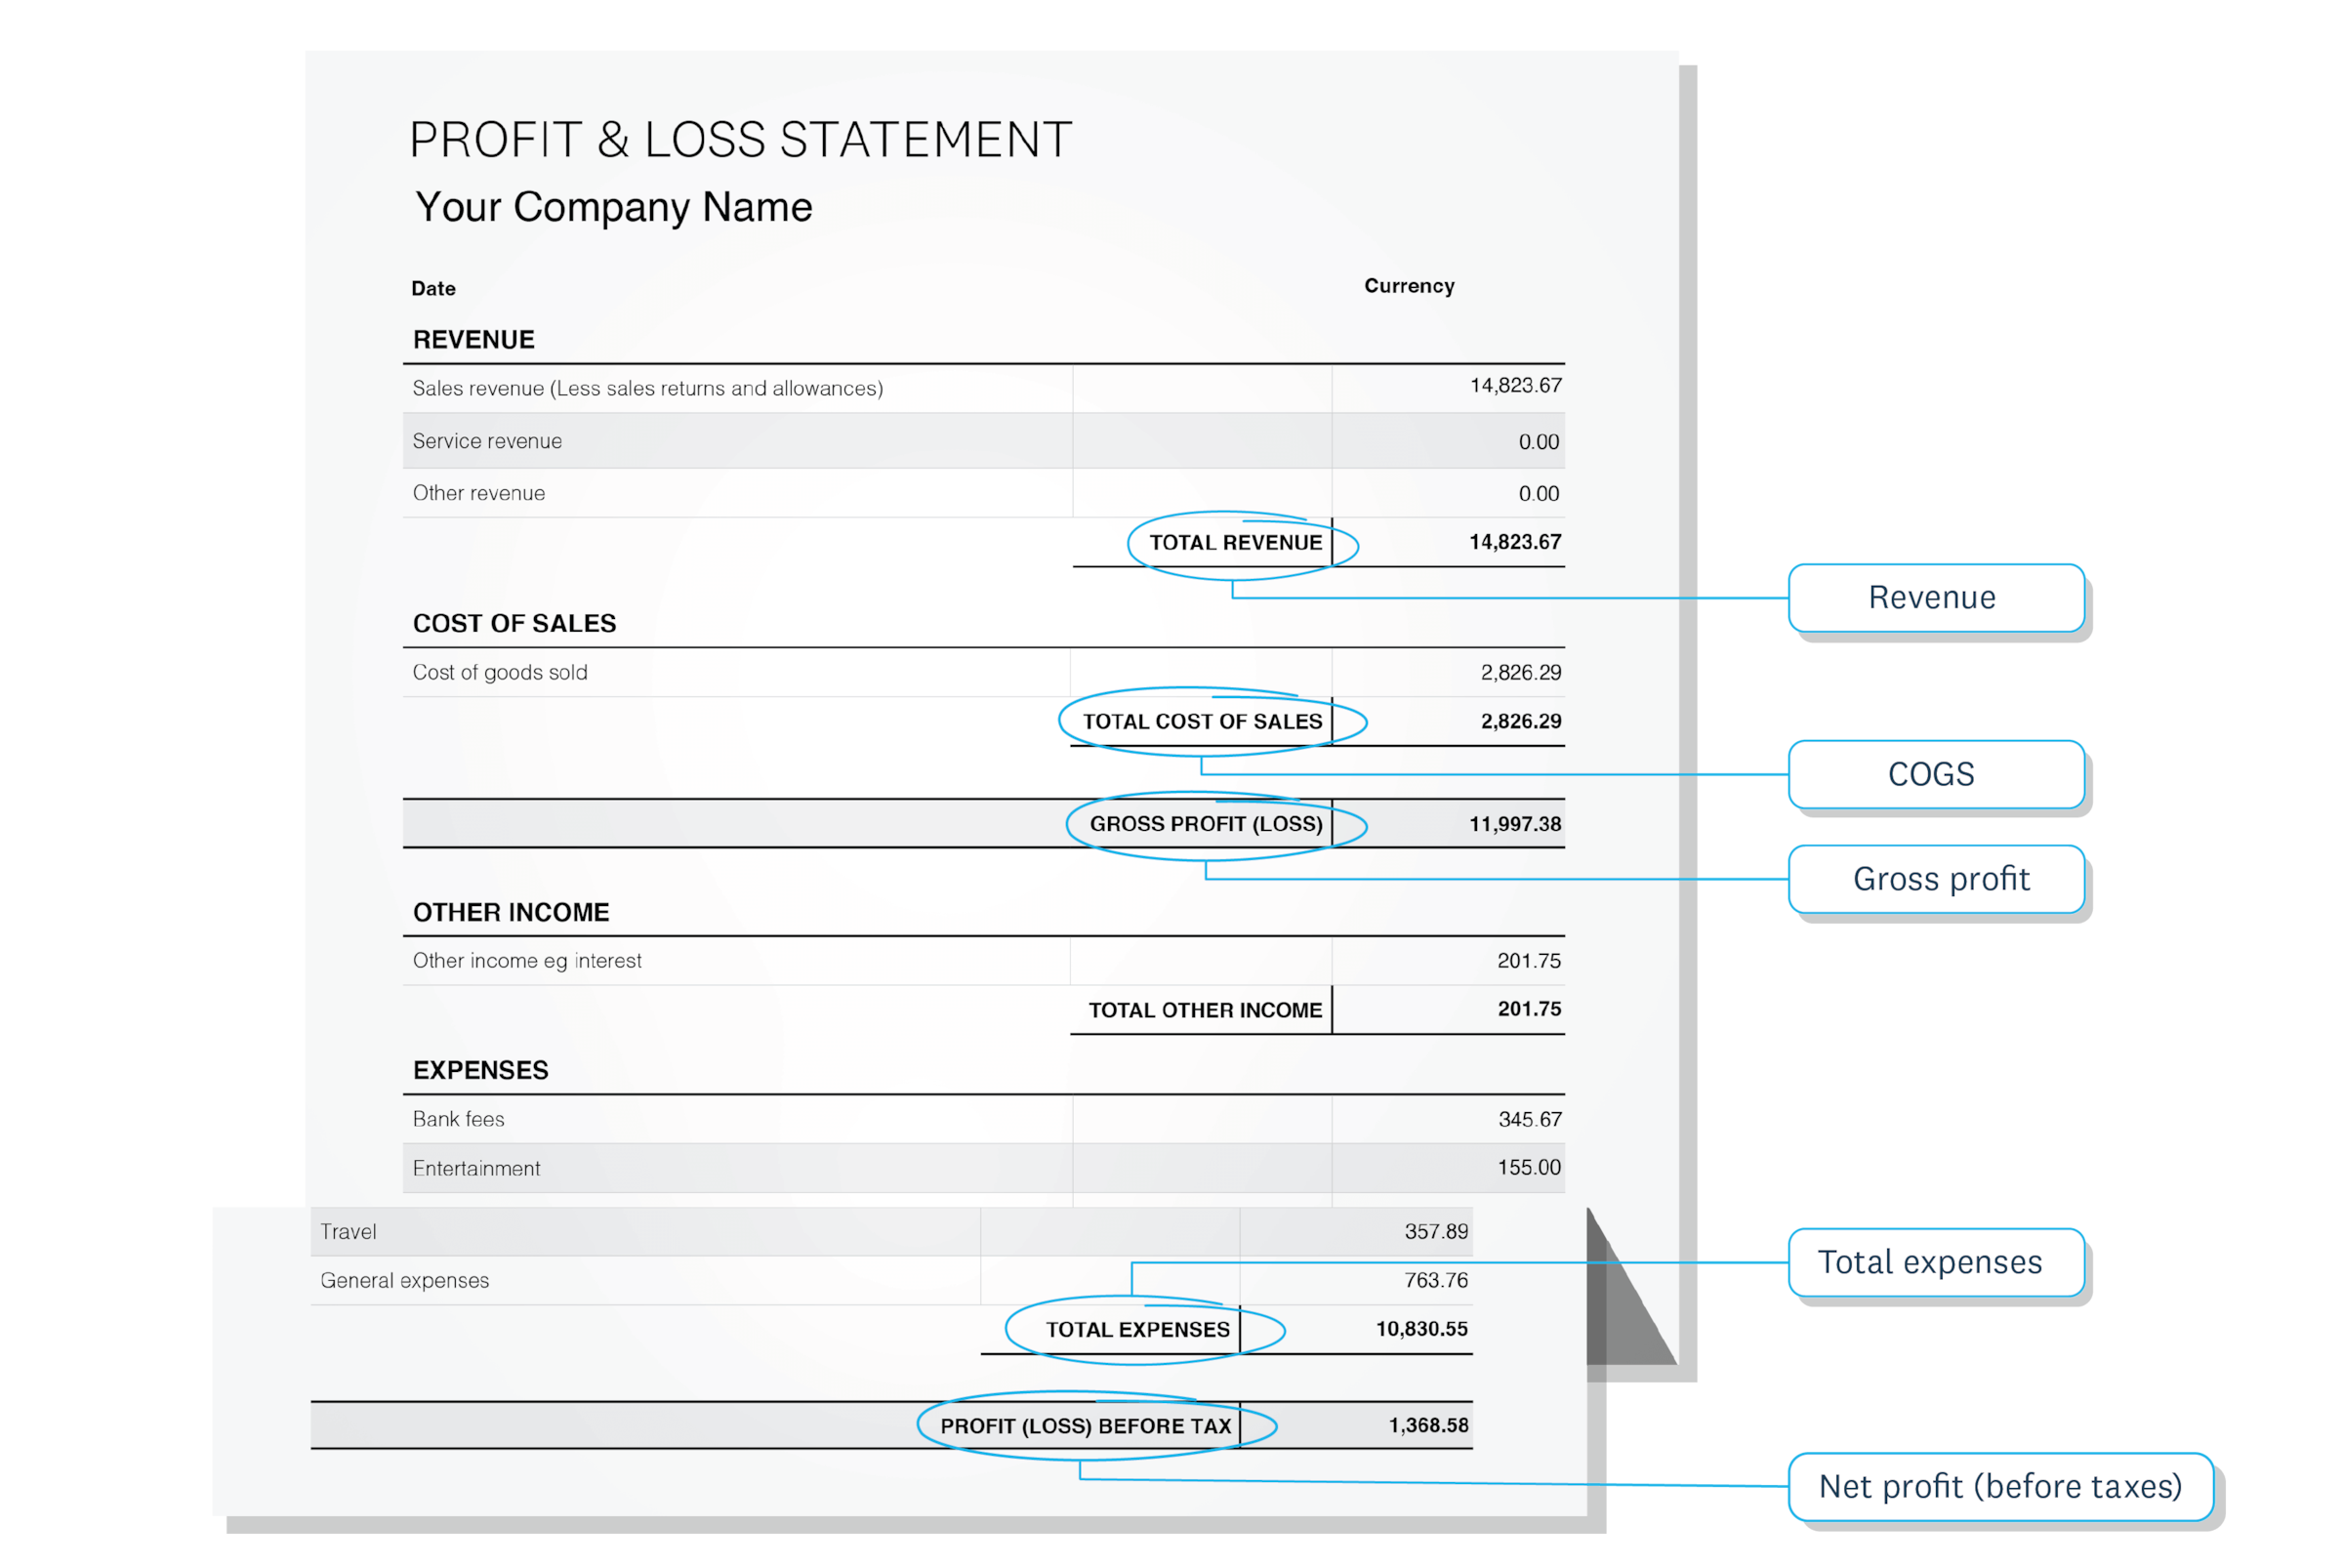 Sample profit and loss statement with sections for revenue, COGS, gross profit, general expenses and net profit.